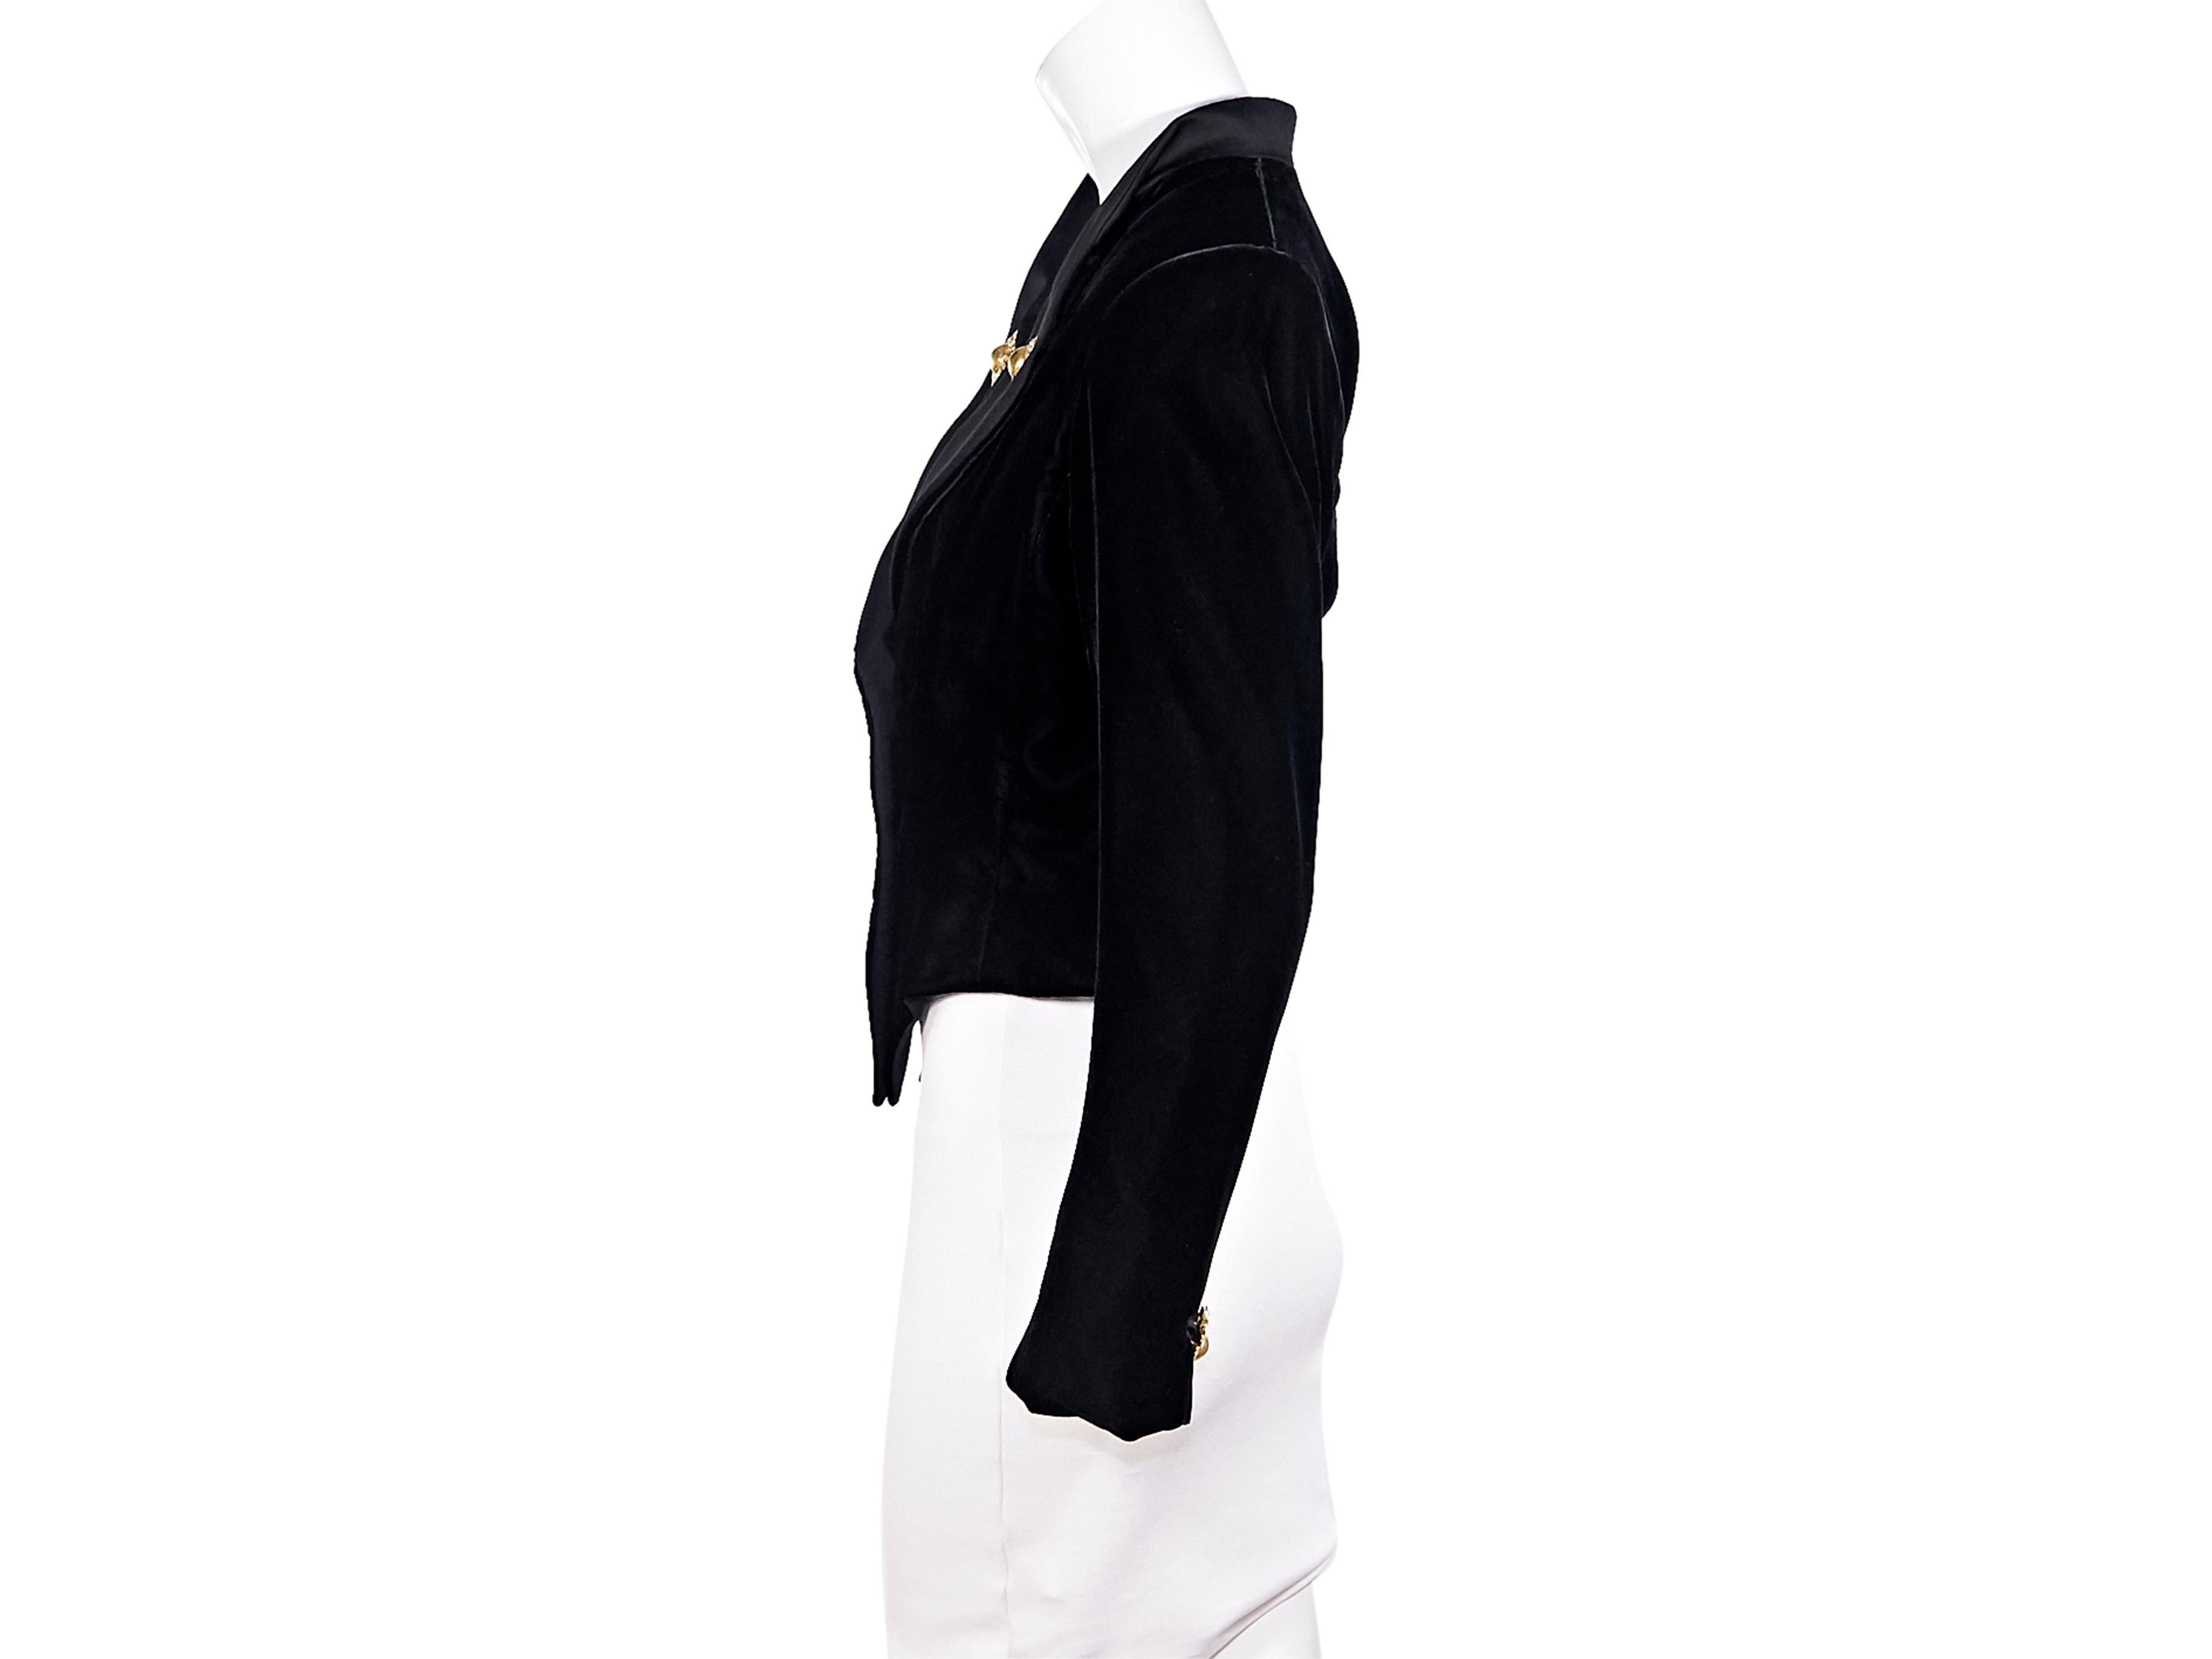 Product details:  Vintage black velvet cropped jacket by Yves Saint Laurent.  From the 1990s.  Accented with decorative buttons.  Satin lapel.  Long sleeves.  Button-front closure.  Seams create a flattering silhouette.  Goldtone hardware.  36